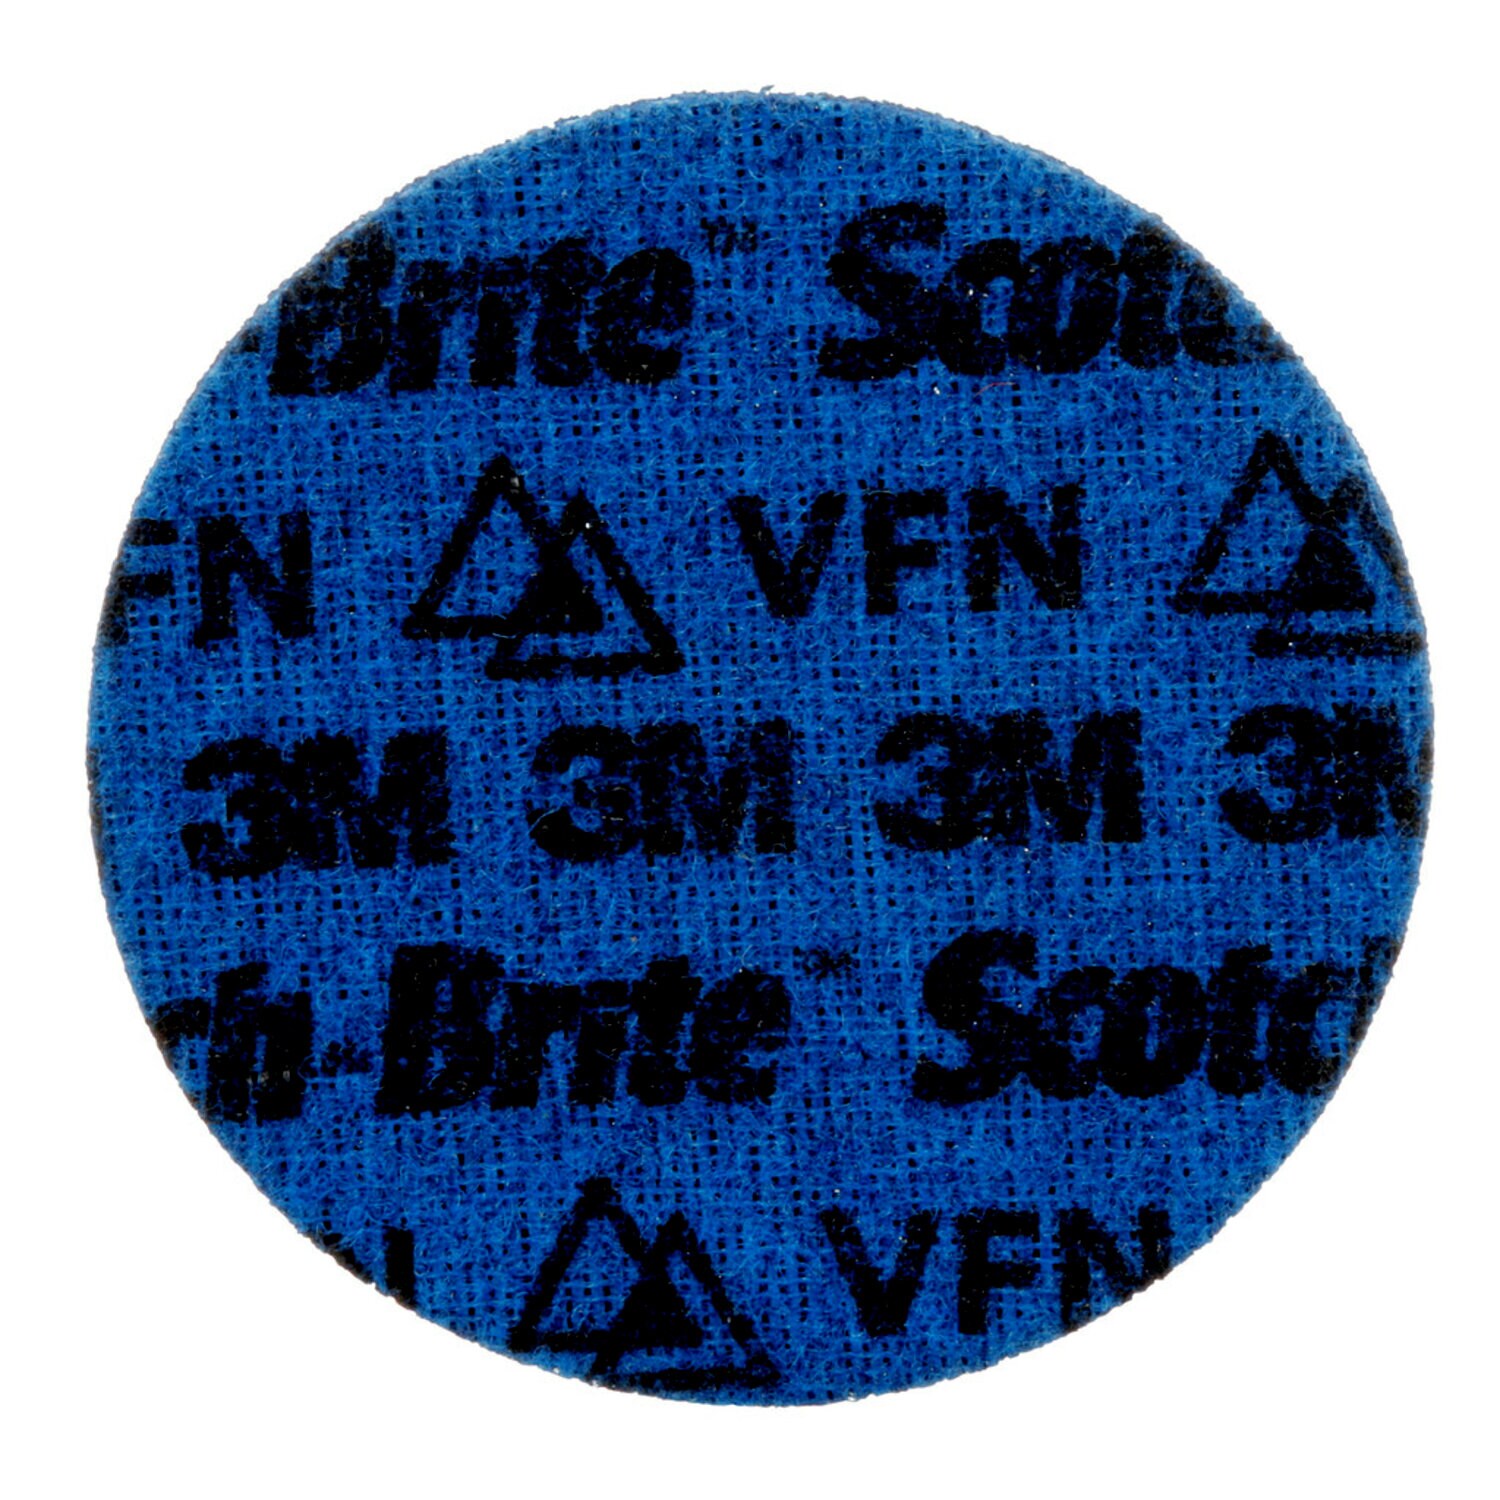 7100266283 - Scotch-Brite Precision Surface Conditioning Disc, PN-DH, Very Fine, Config